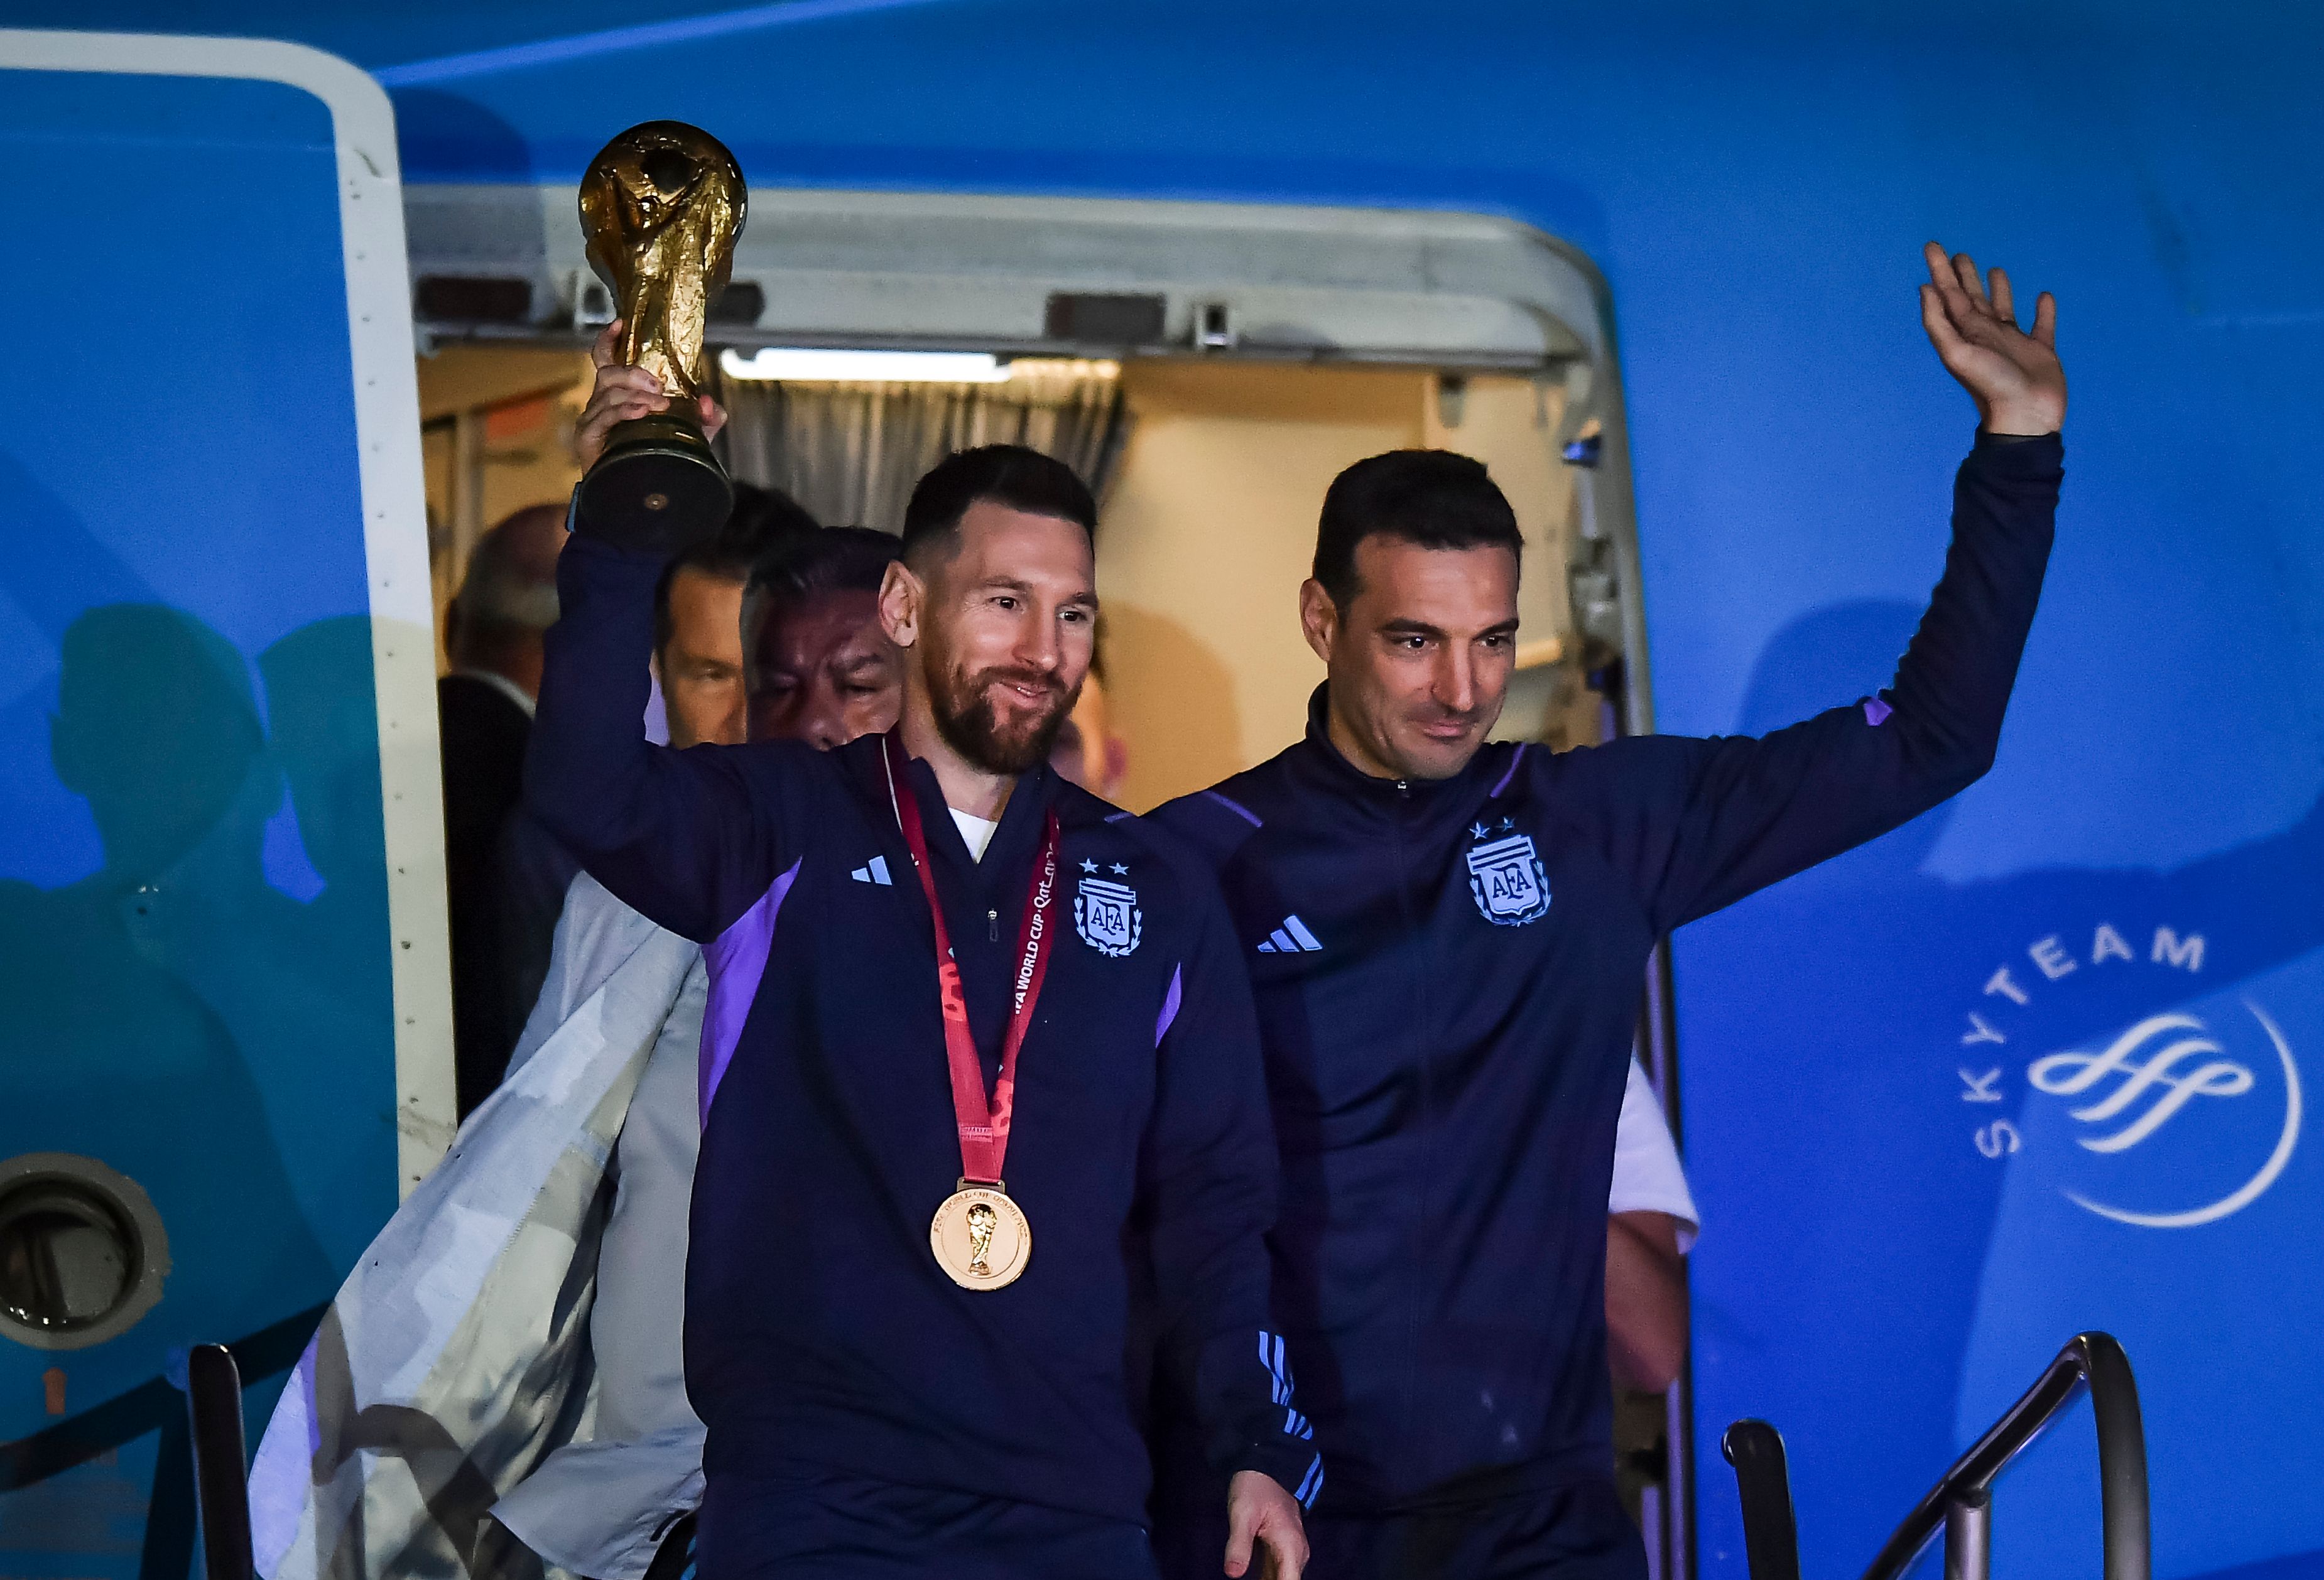 Lionel Messi of Argentina (L) and Lionel Scaloni (R) holds the FIFA World Cup during the arrival of the Argentina men's national football team after winning the FIFA World Cup Qatar 2022 on December 20, 2022 in Buenos Aires, Argentina.